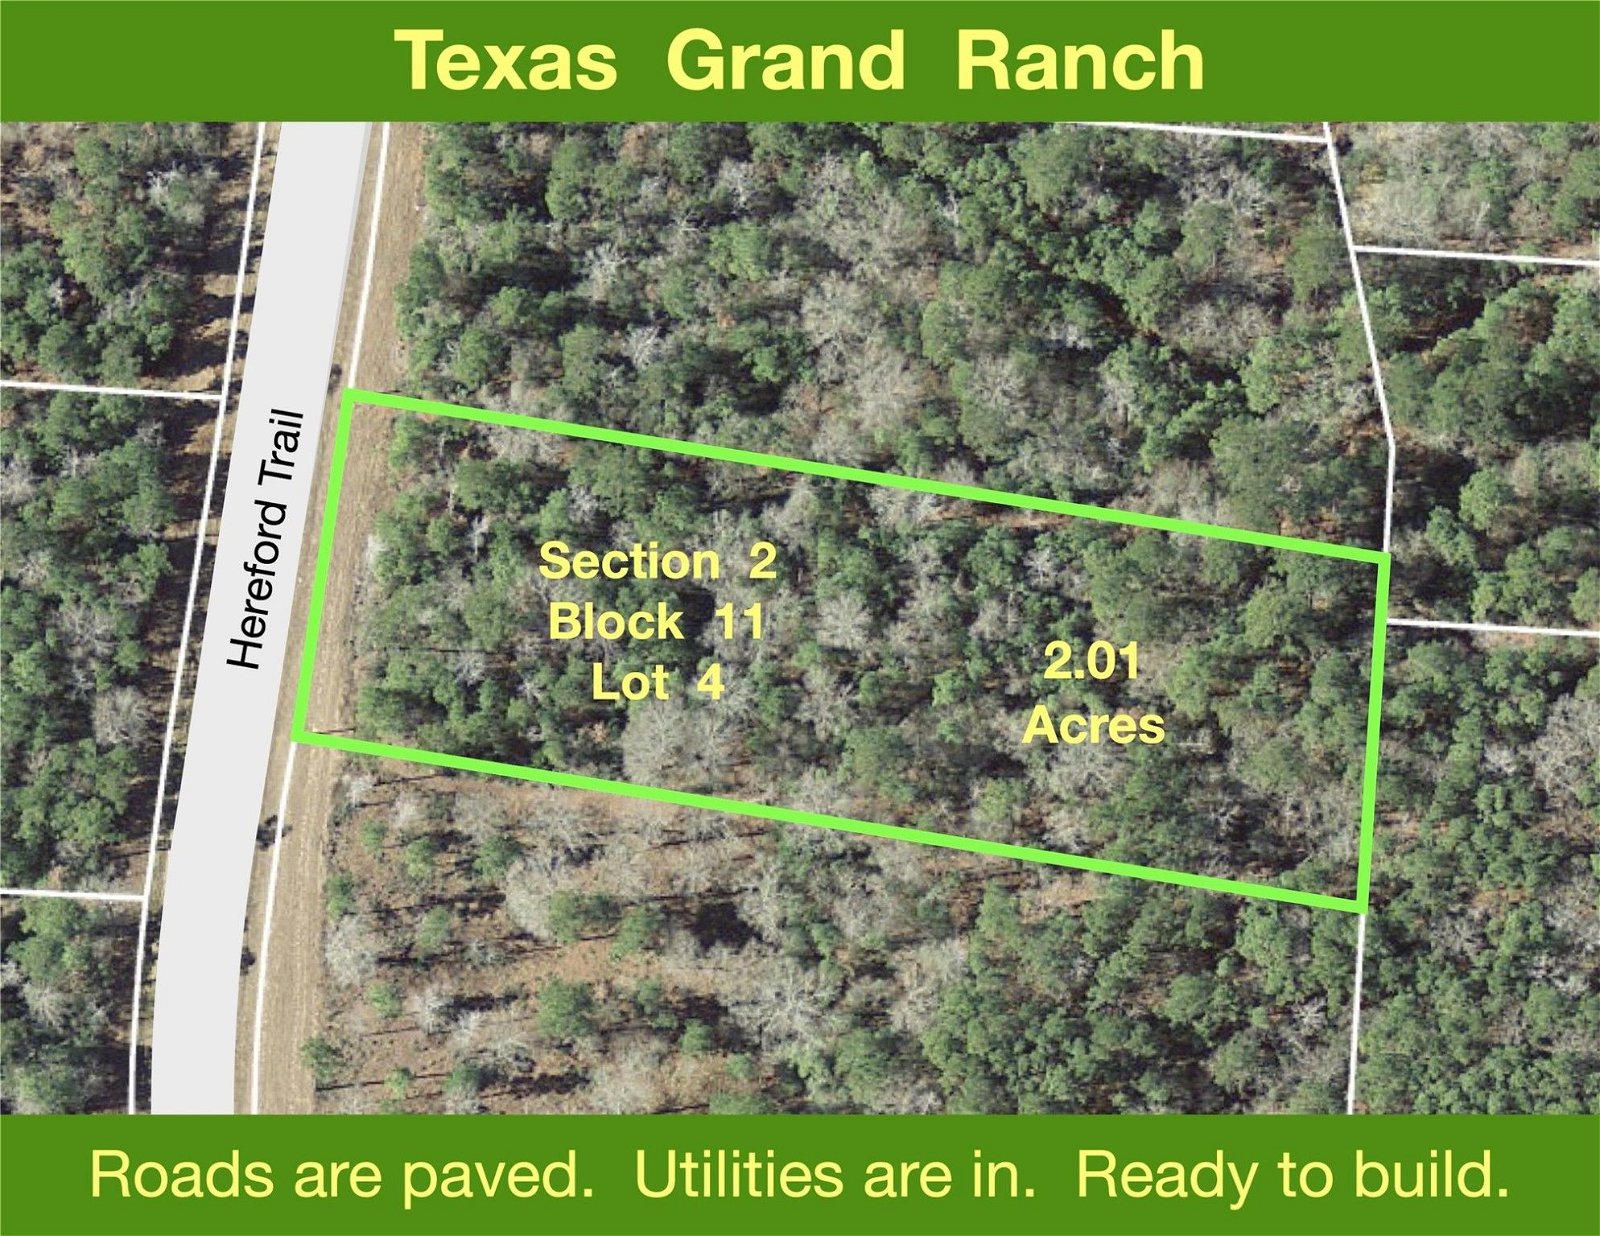 Real estate property located at 2-11-4 Hereford, Walker, I Texas Grand Ranch, Huntsville, TX, US